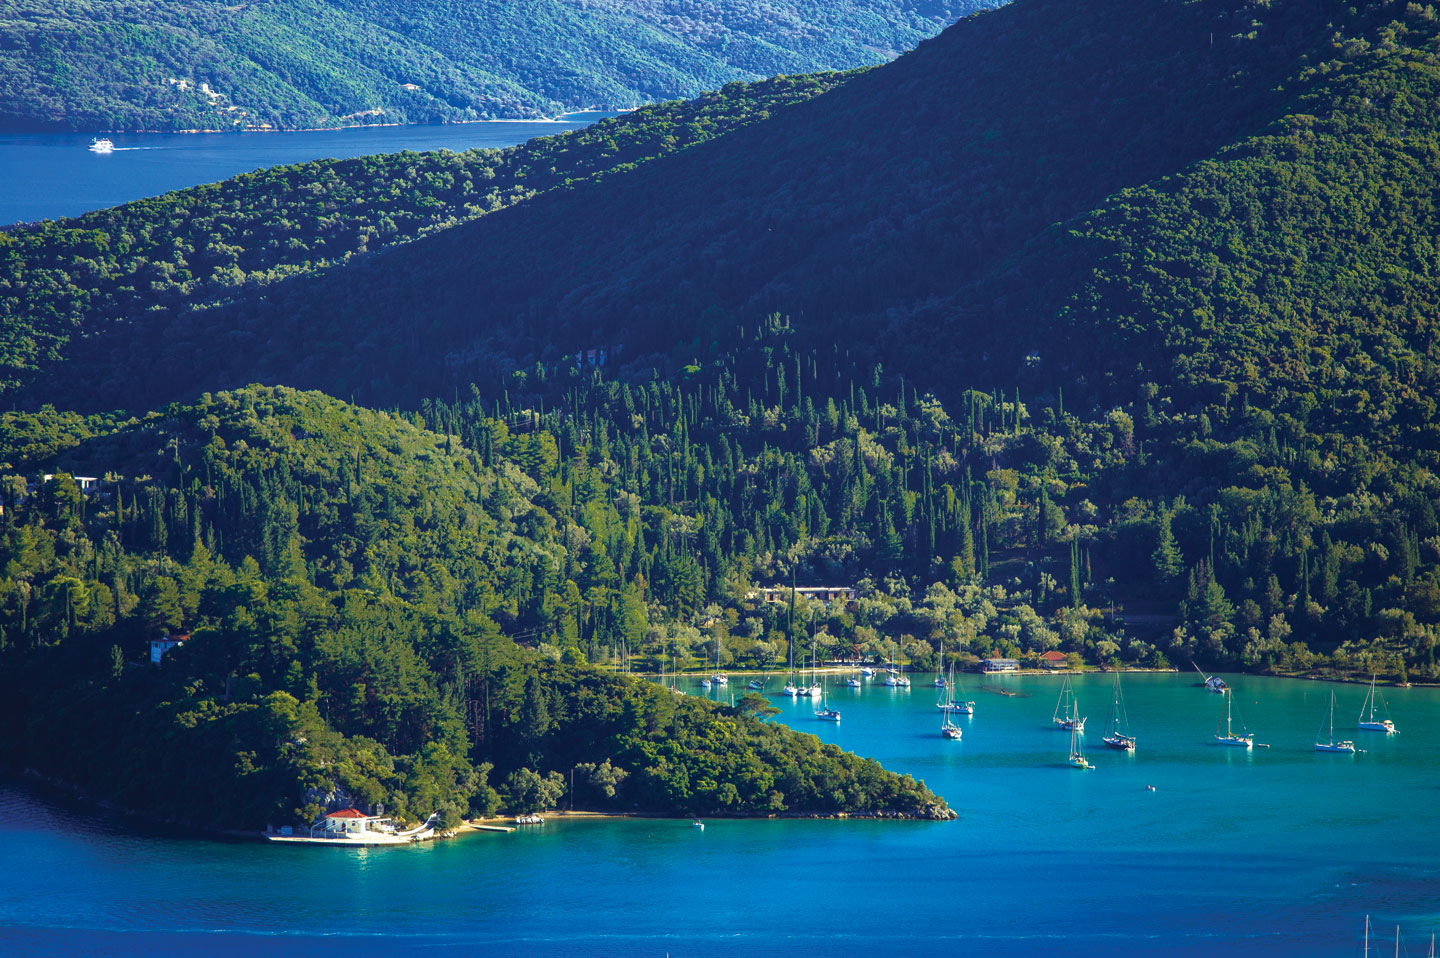 A beautiful natural harbour in Lefkada, Greece